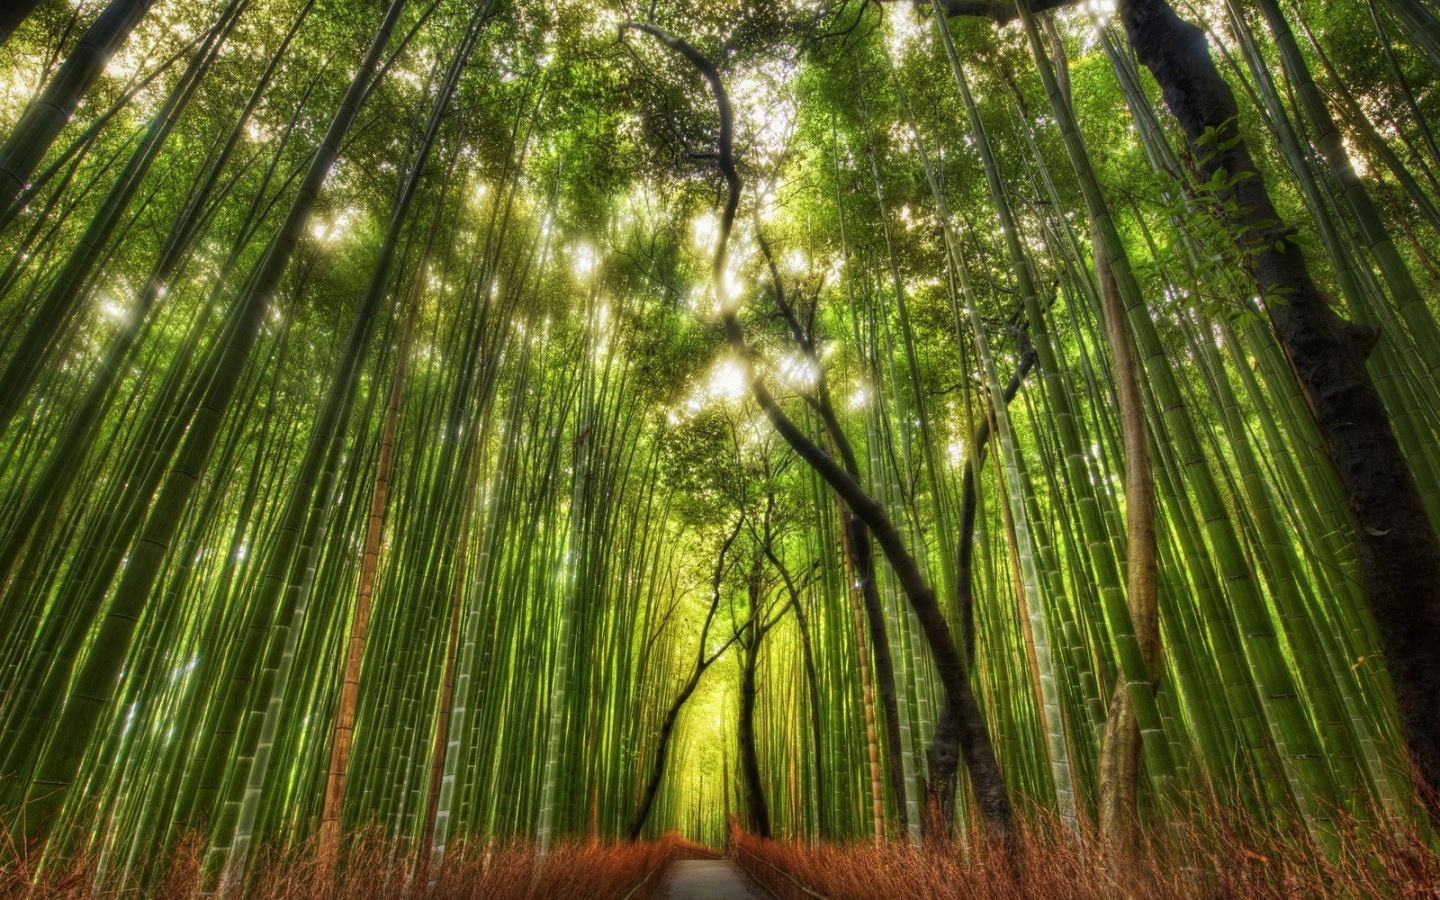 The road in the bamboo grove